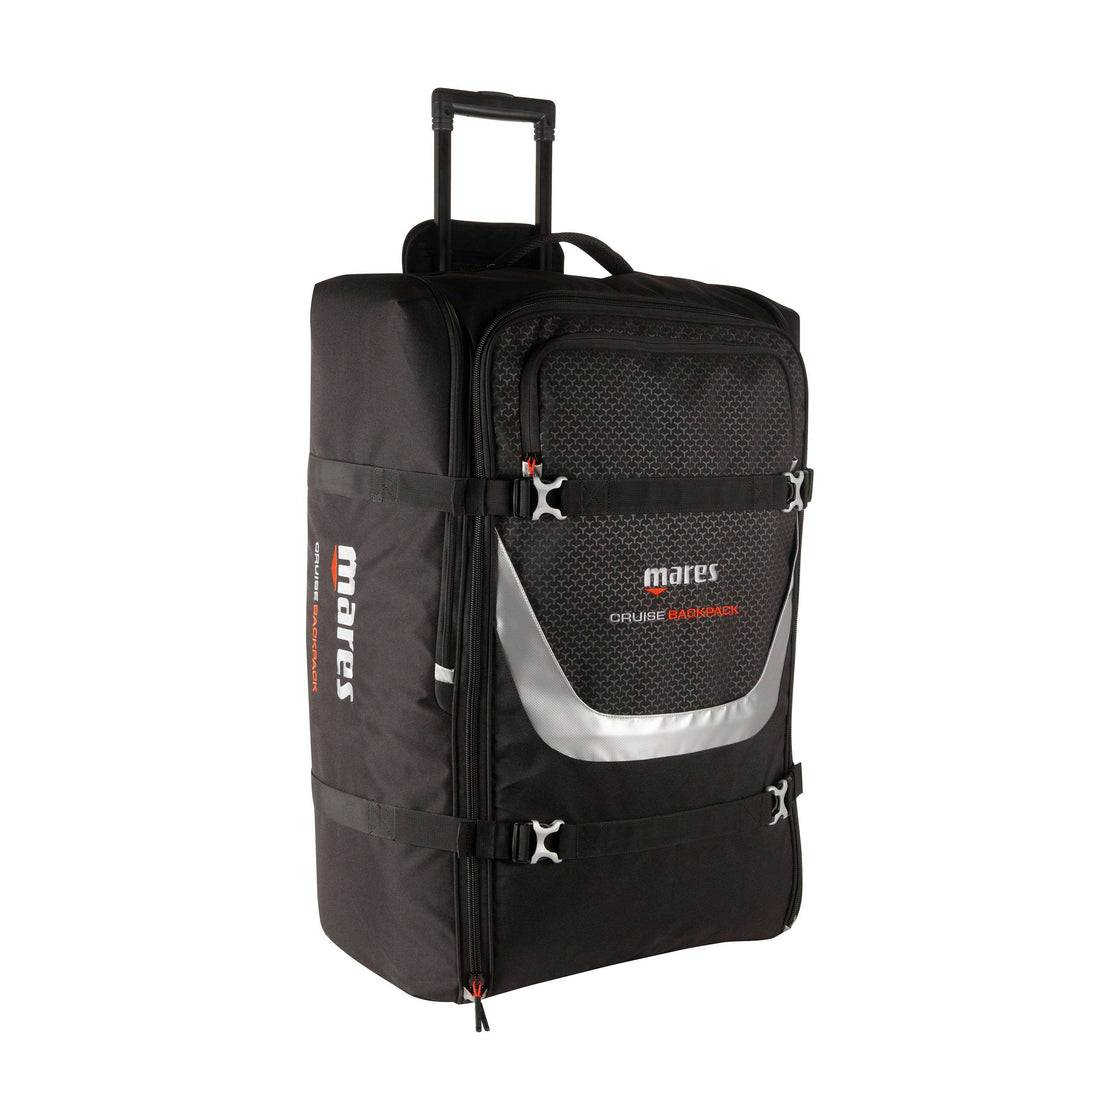 Mares CRUISE BACKPACK - WATERSPORTS24